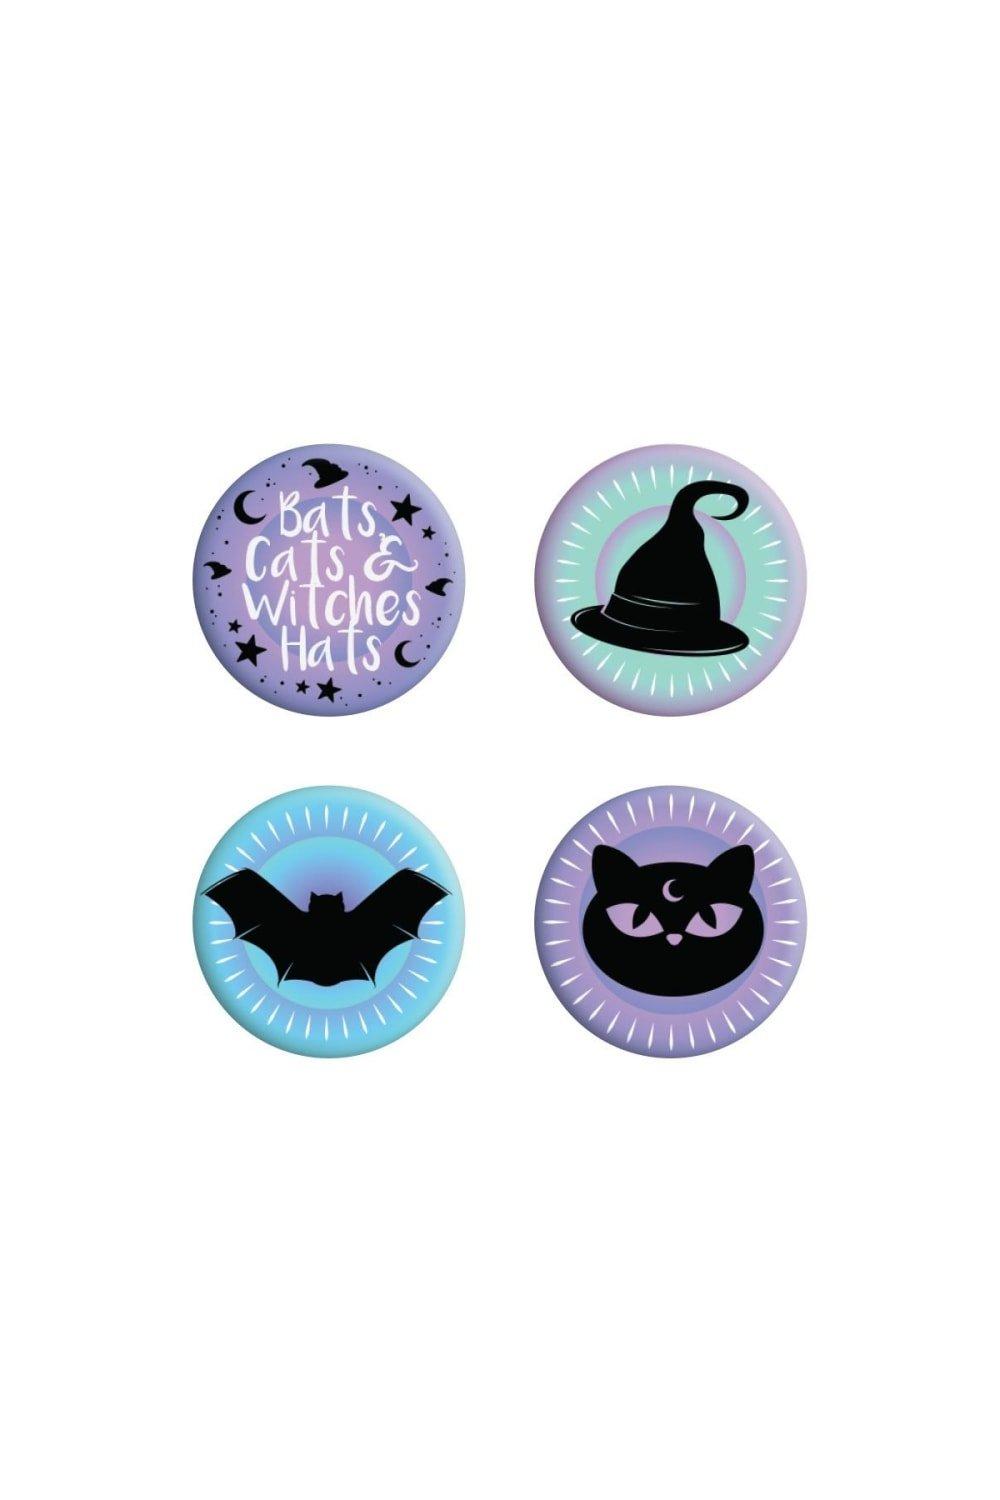 Bats Cats And Witches Hats Pastel Goth Badge Set (Pack of 4)